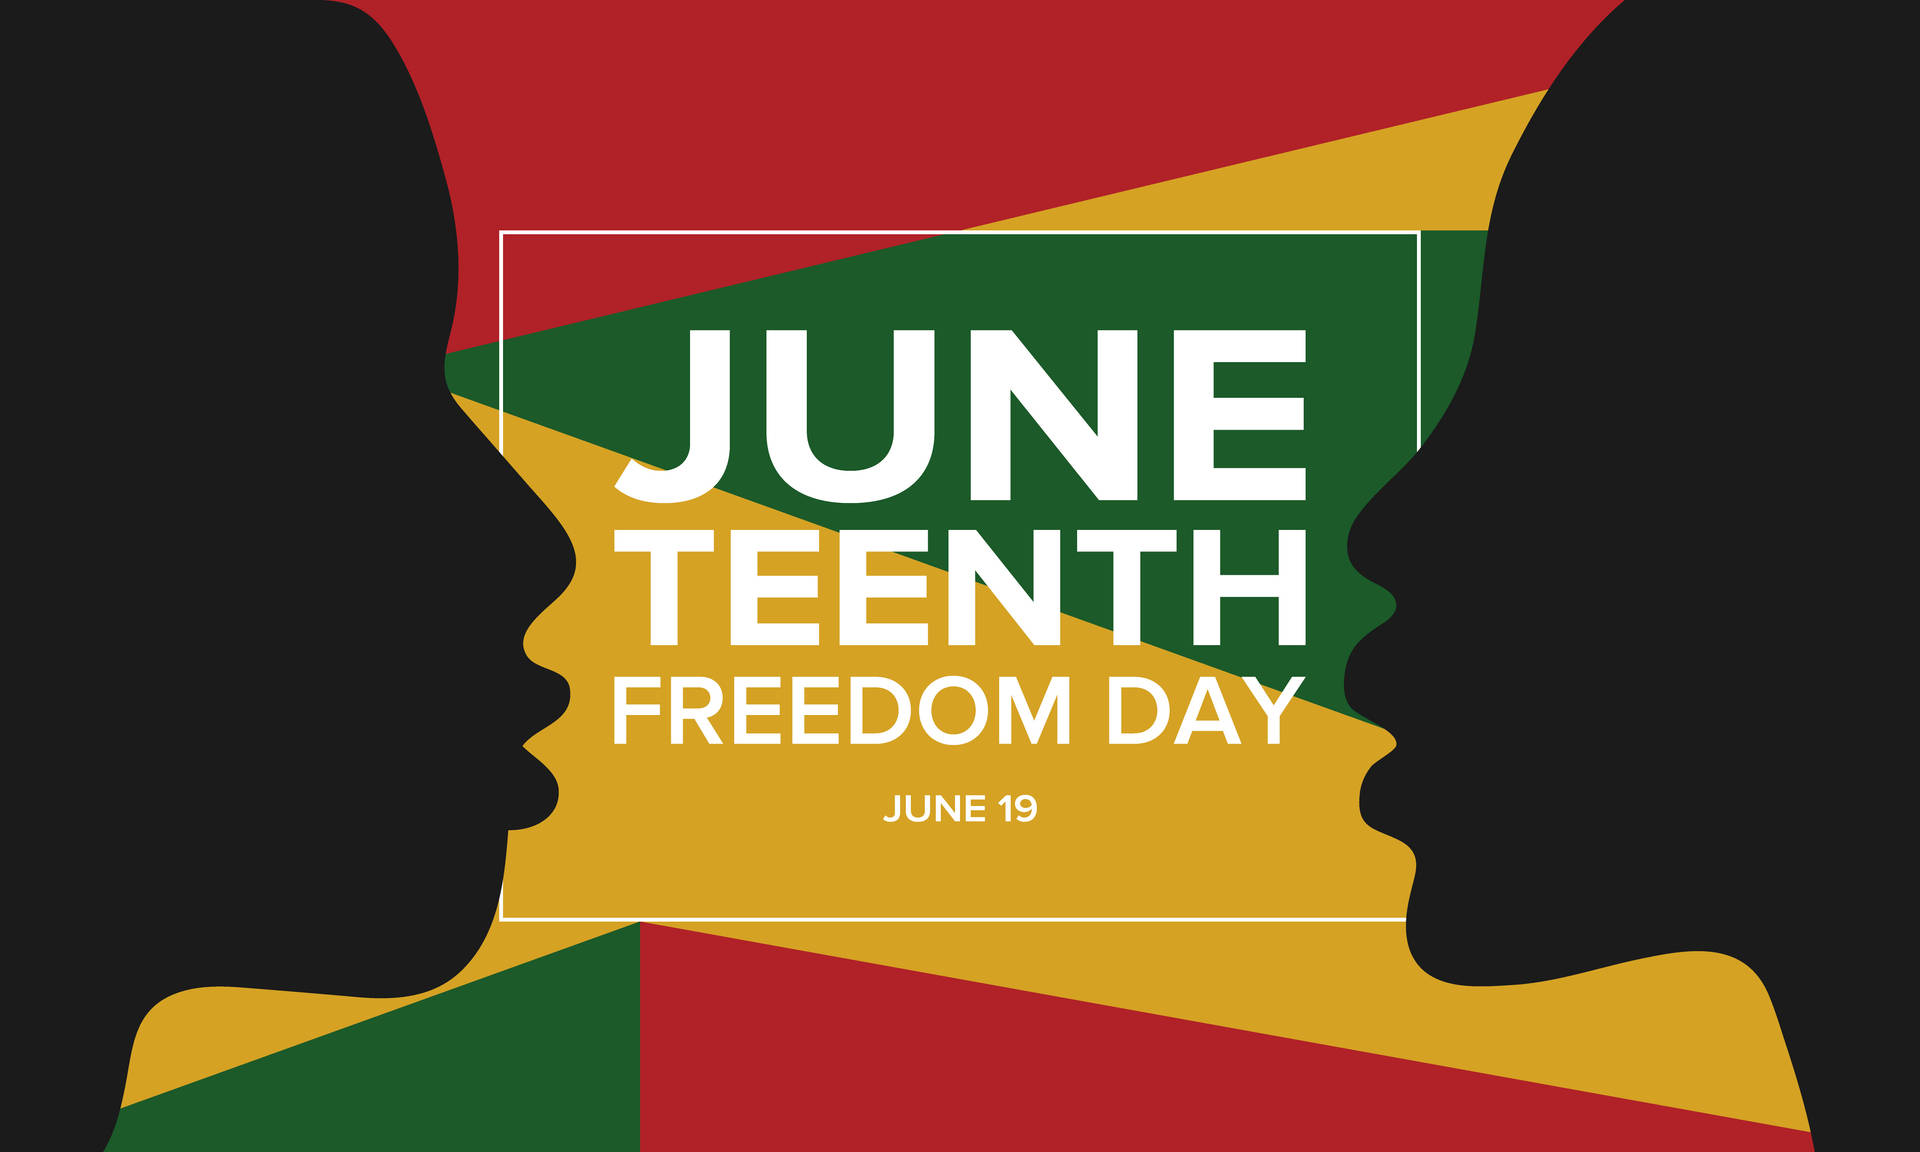 Juneteenth With Human Faces Silhouettes Wallpaper